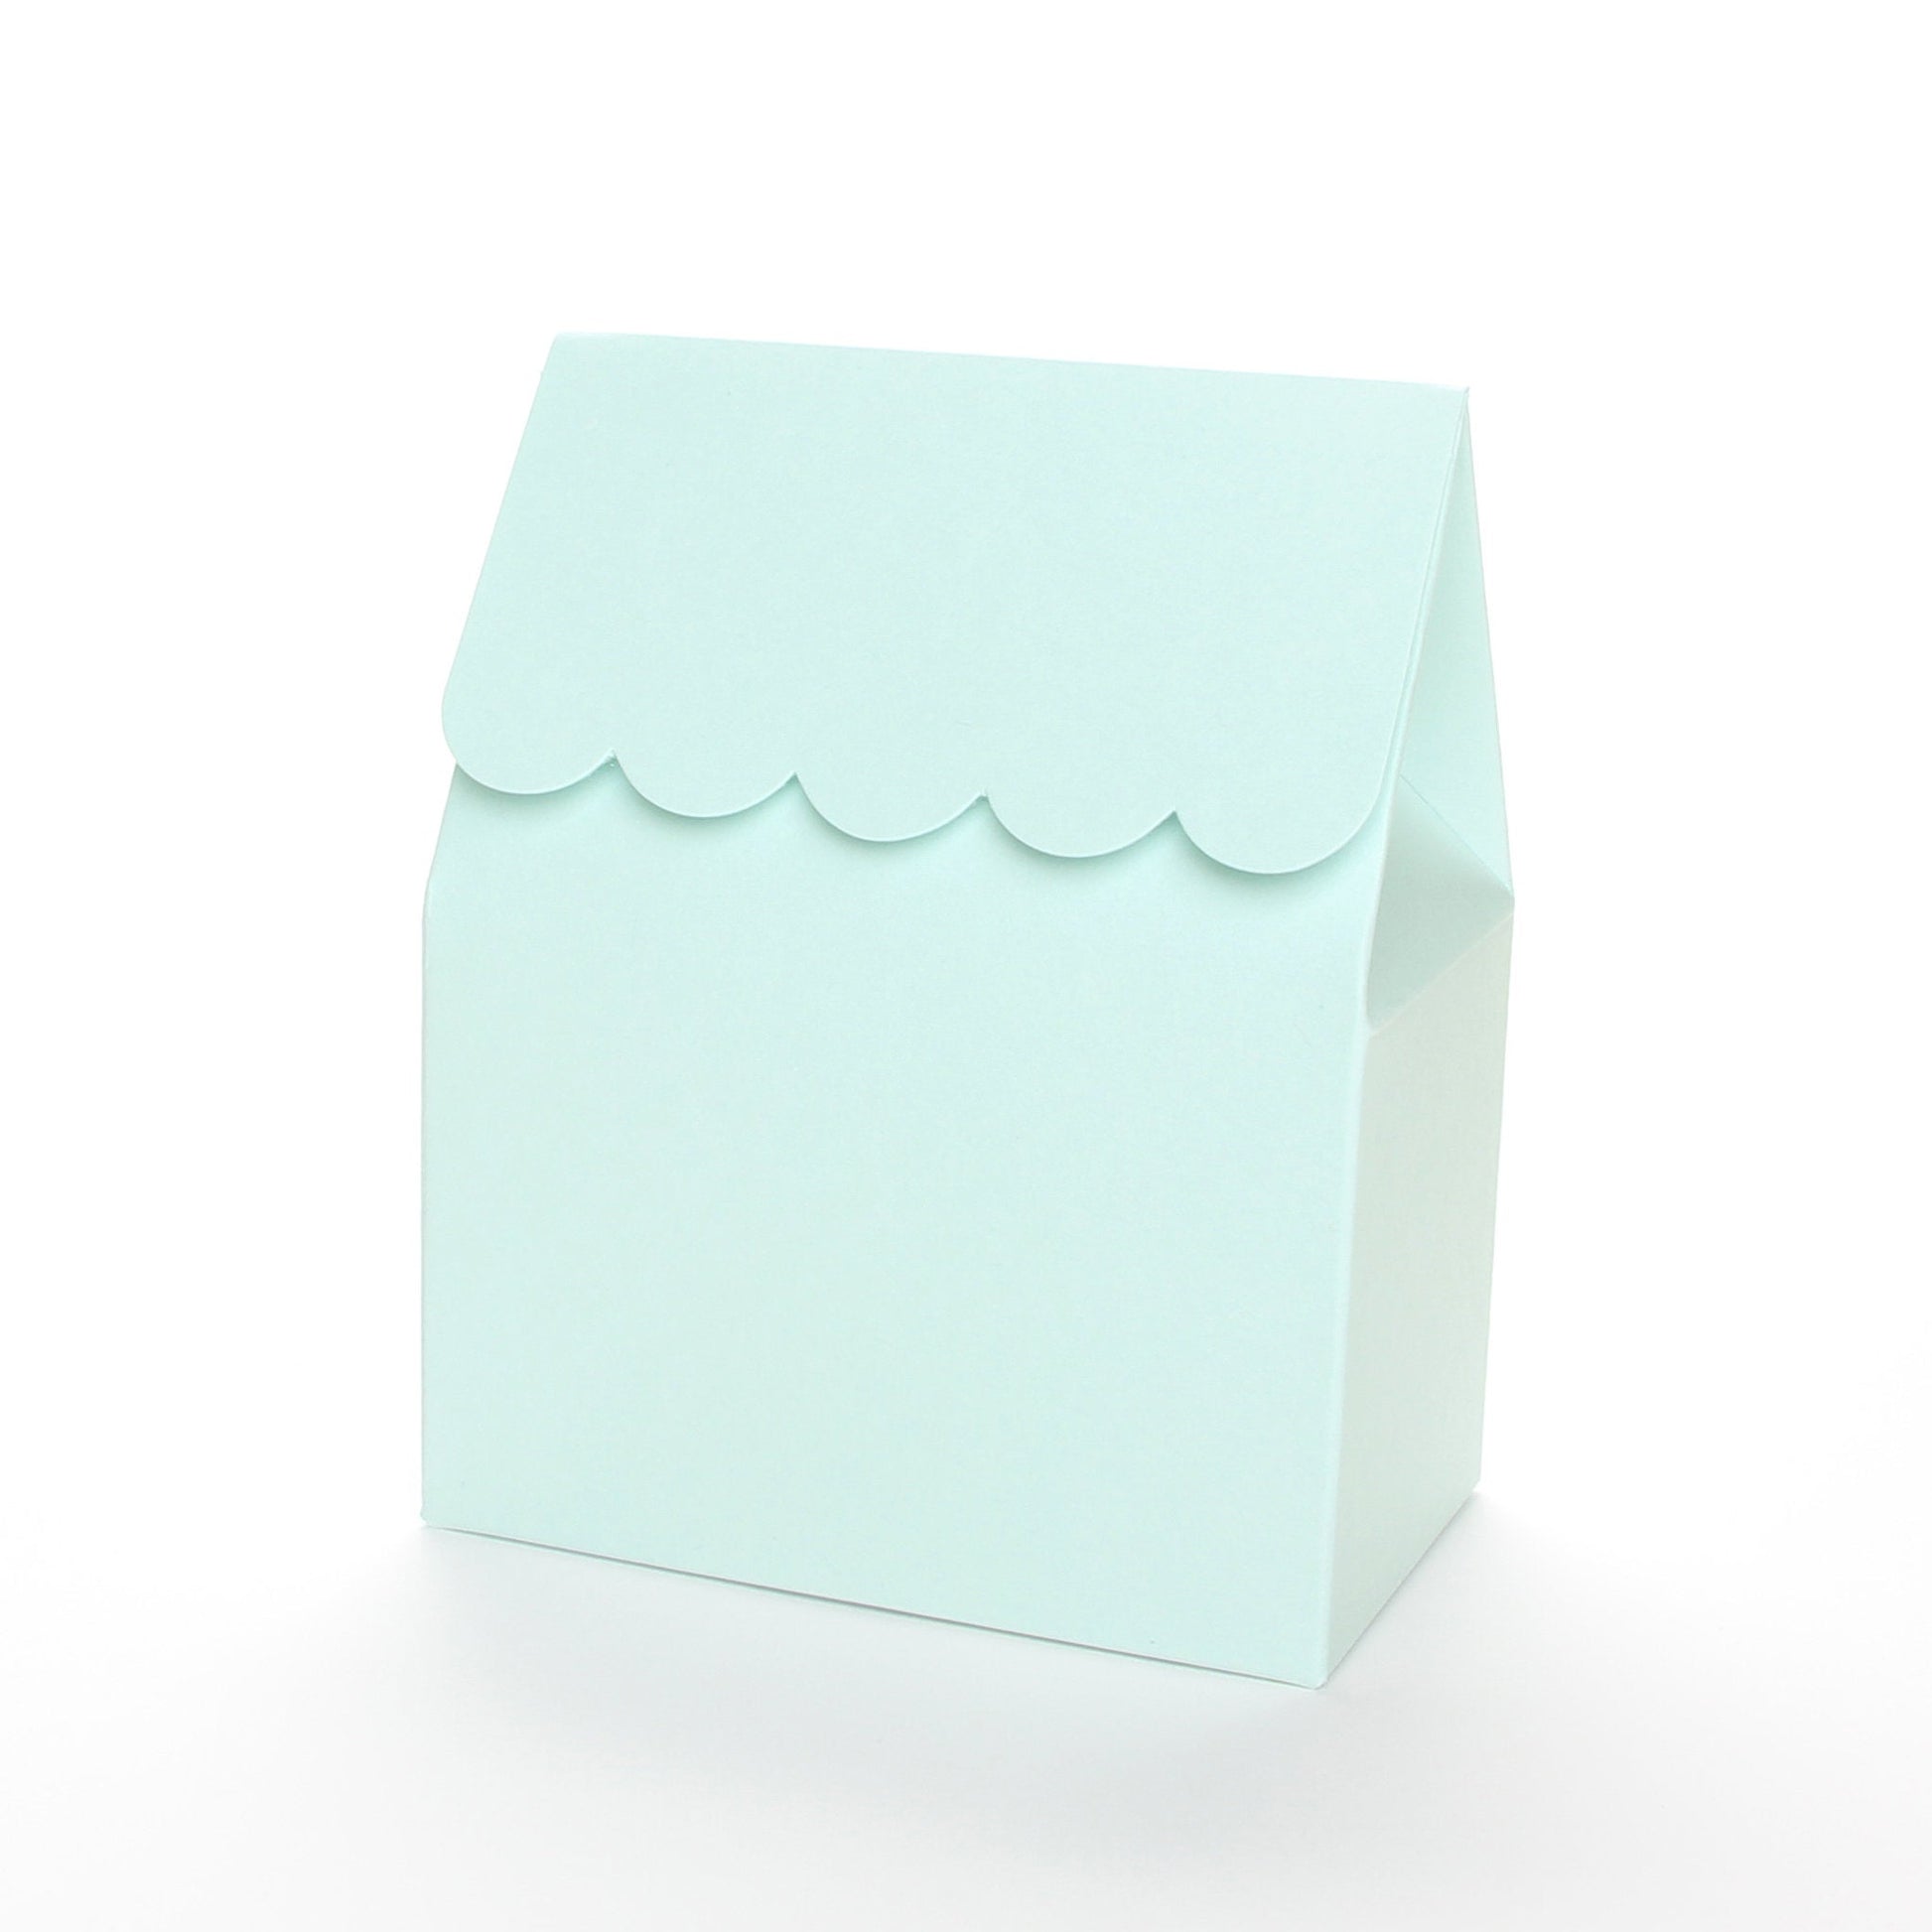 Light blue favor box by Lux Party with a scalloped edge on a white background.